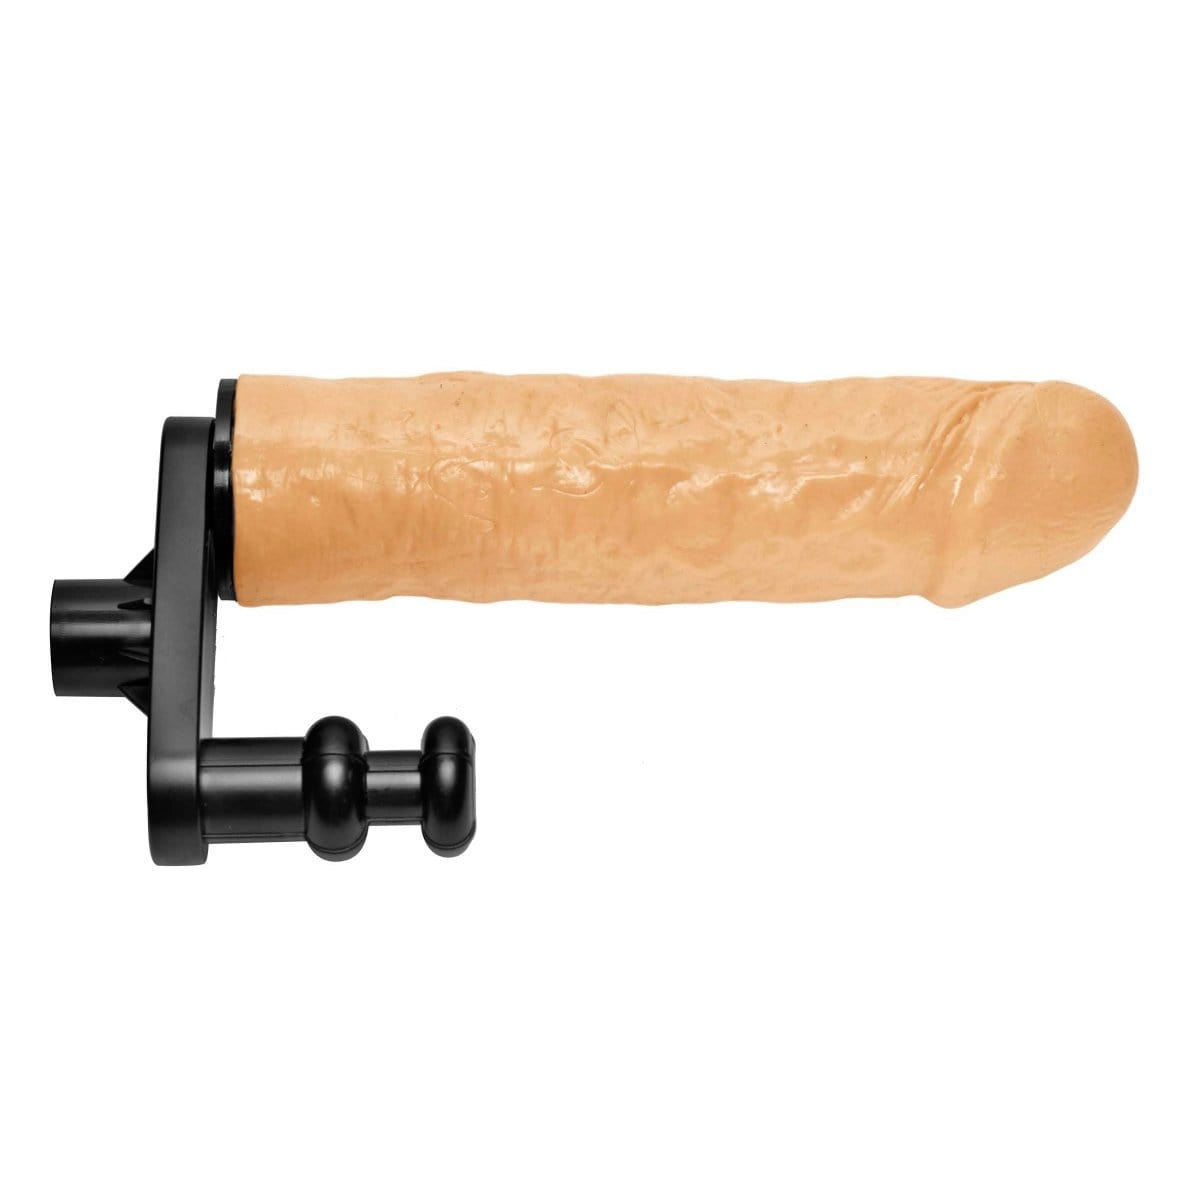 LoveBotz Sex Machine Accessories Dual Delight Double Penetration Adapter at the Haus of Shag